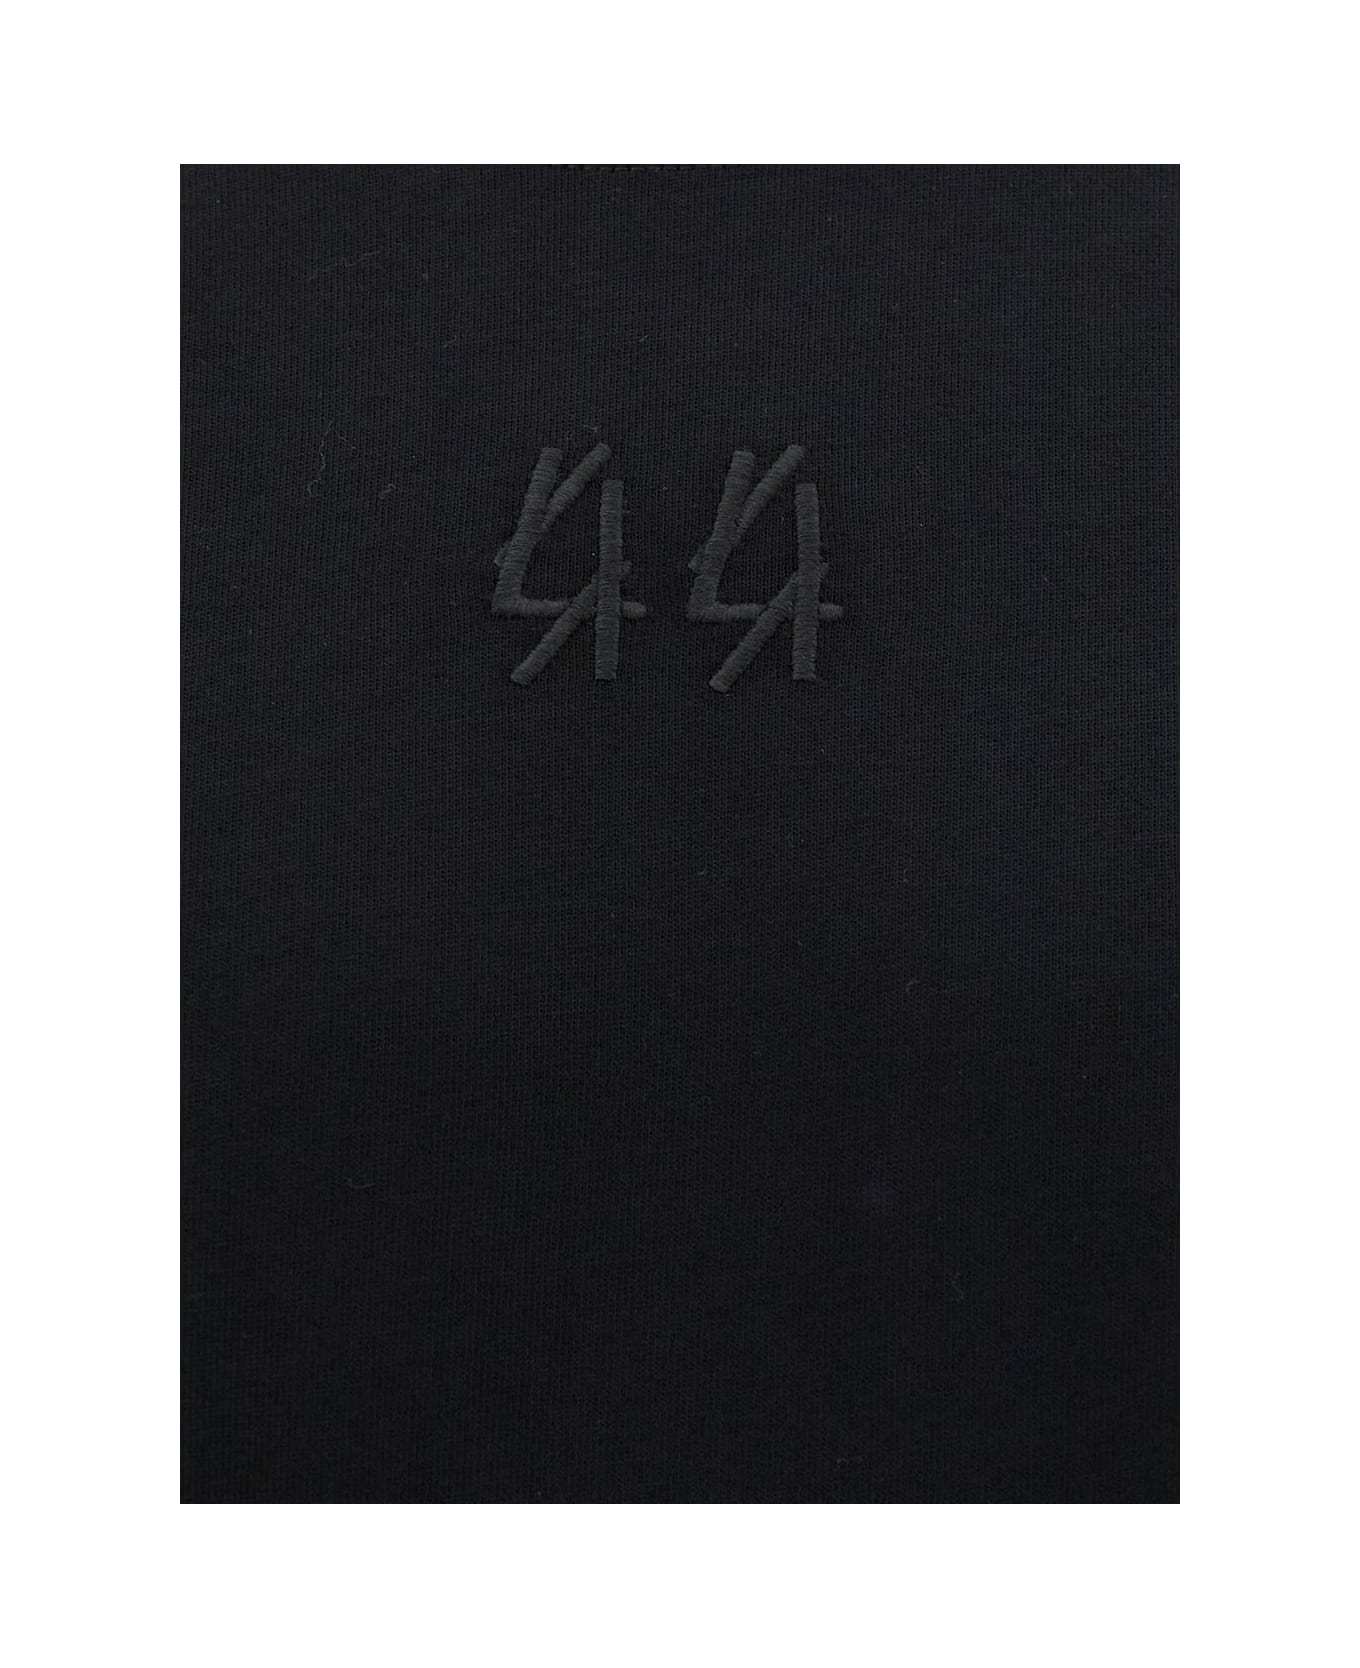 44 Label Group Classic Tee